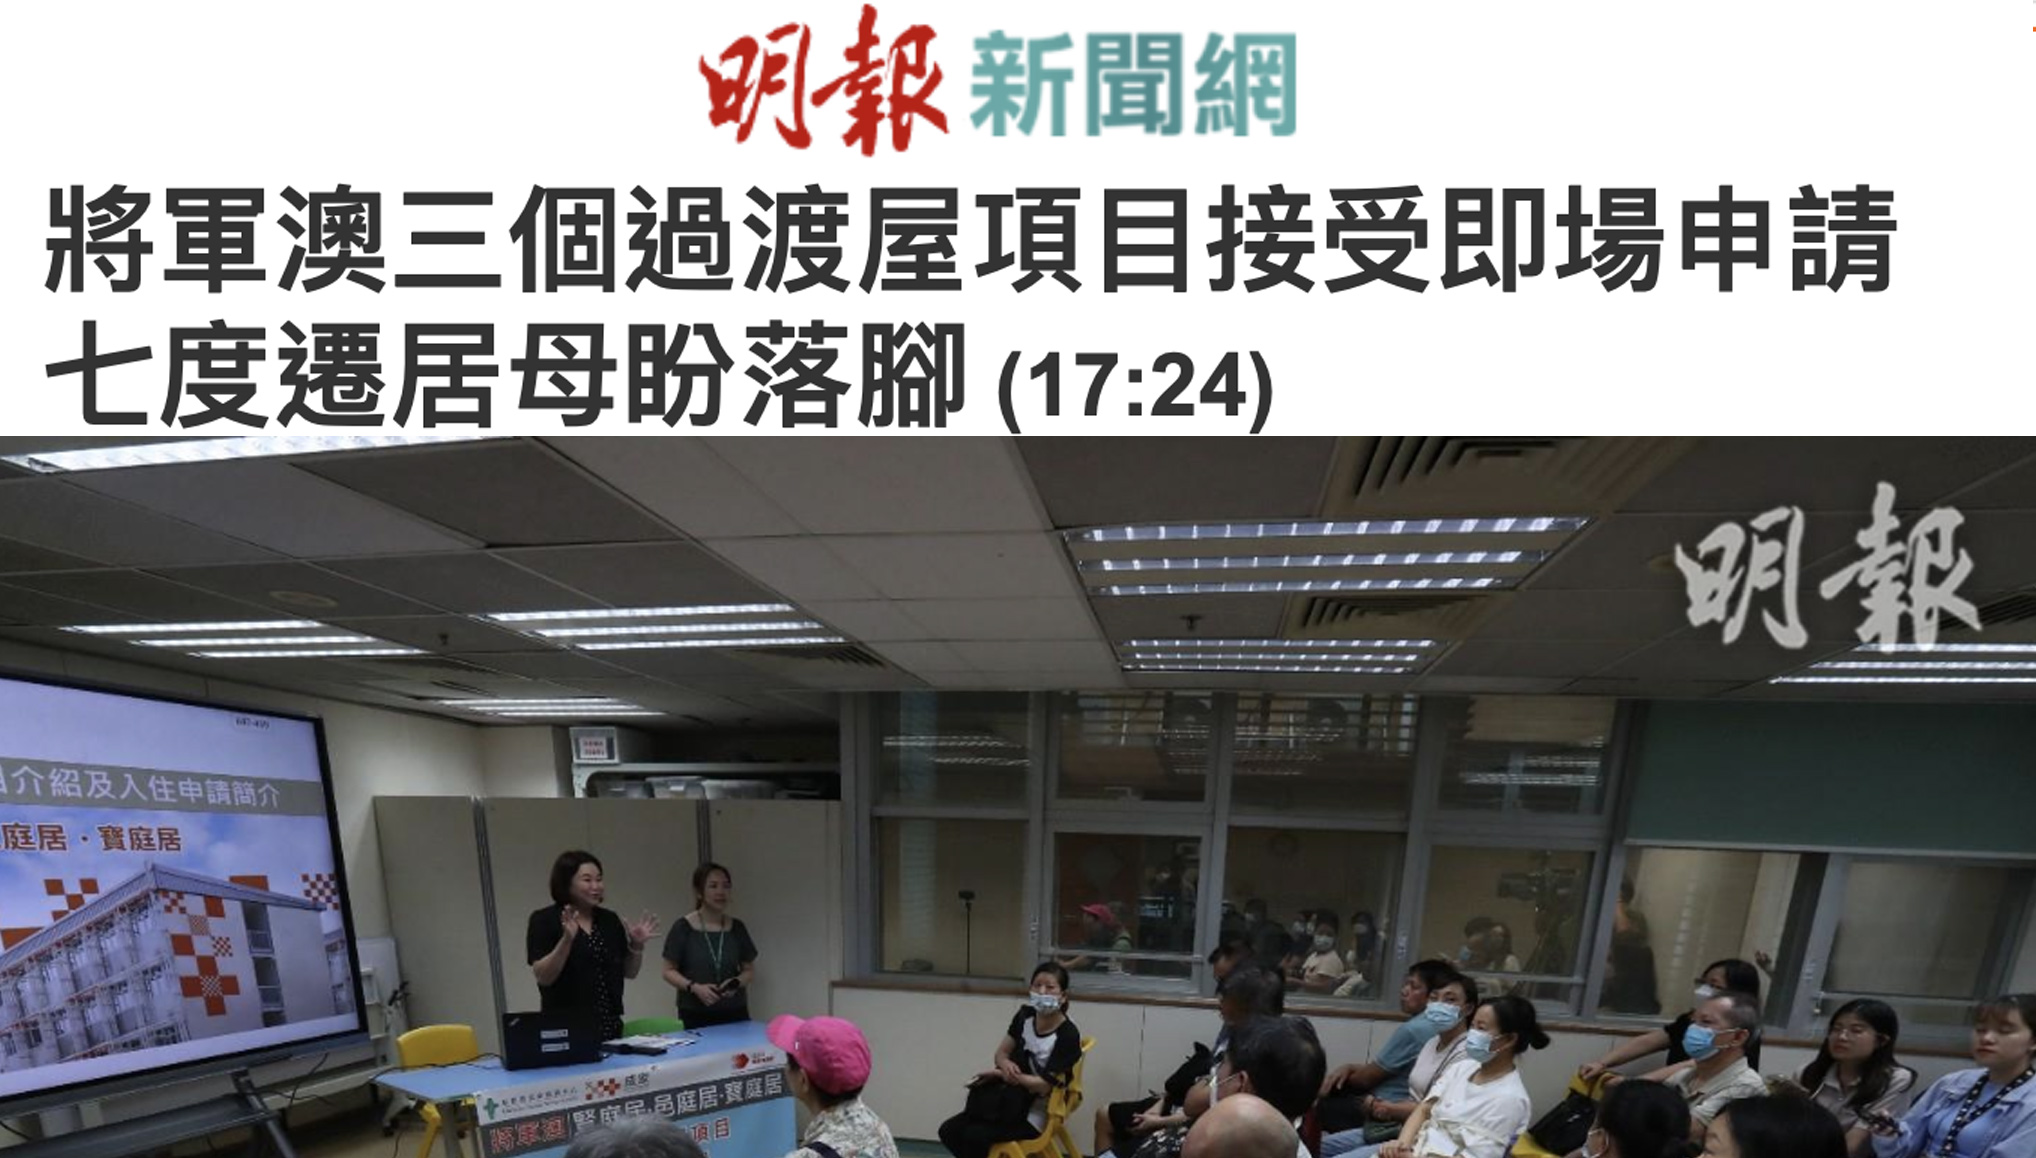 Cover Image - Mingpao - Transitional Housing 